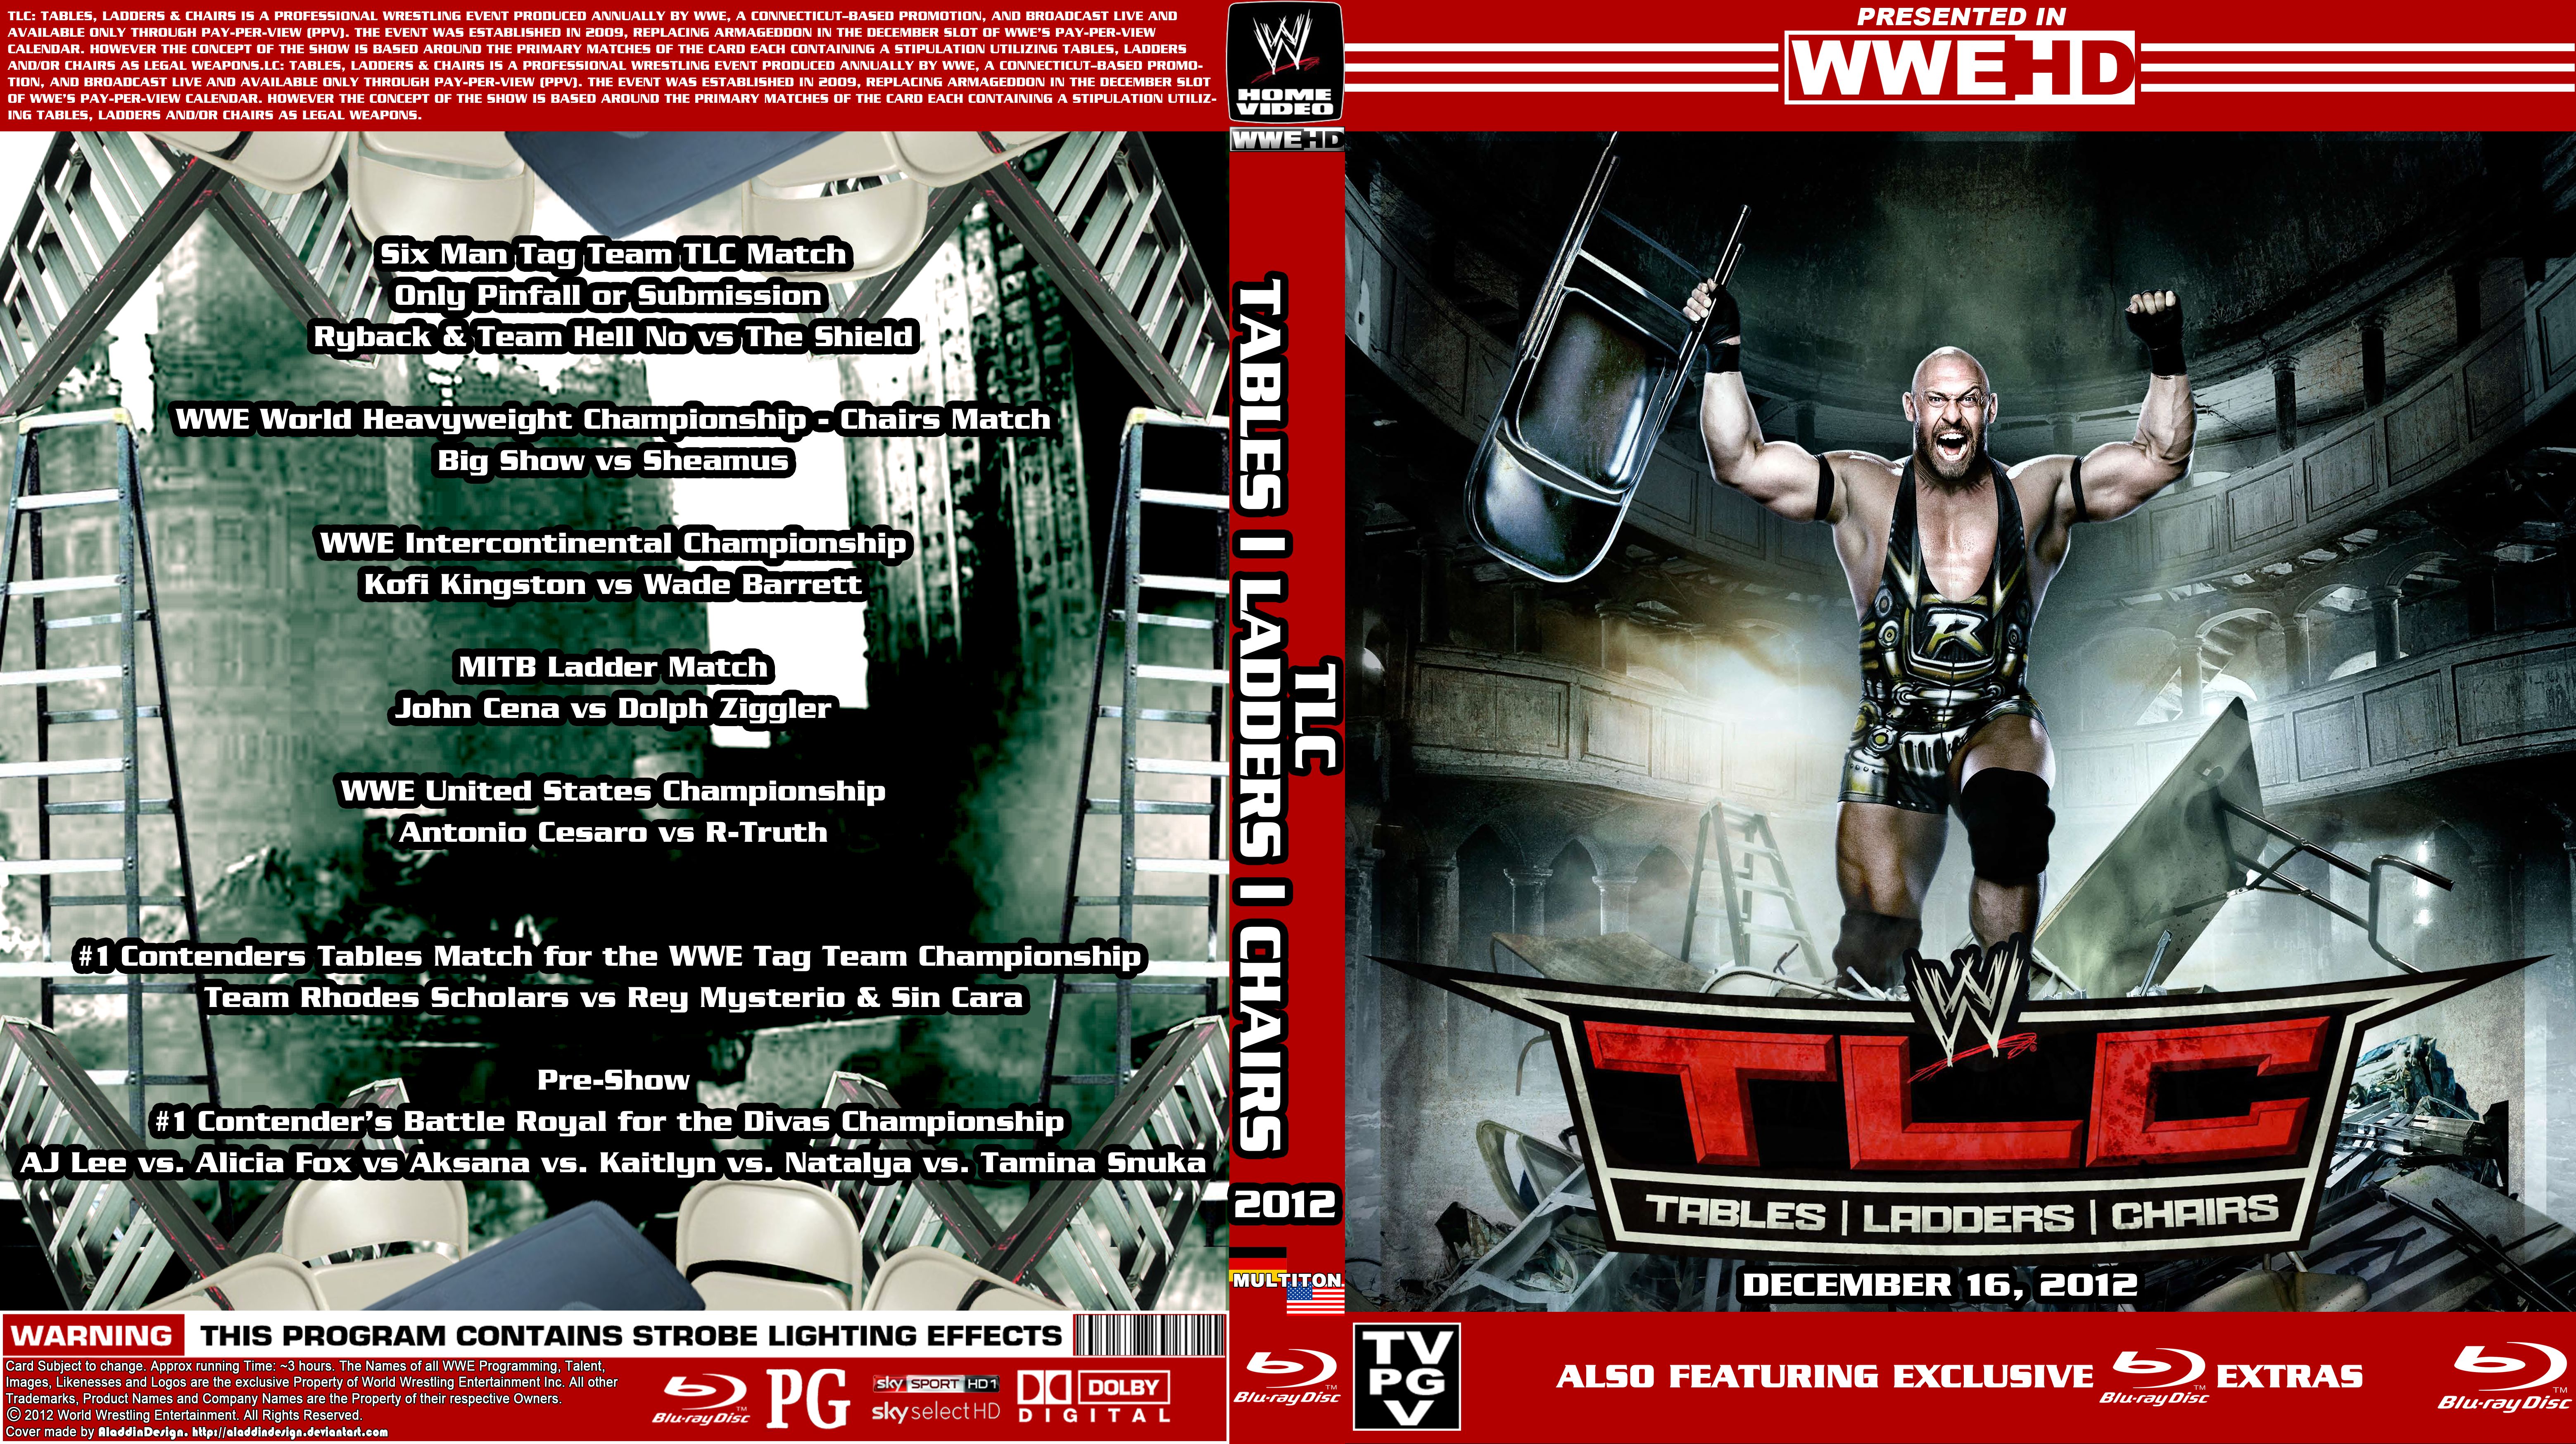 WWE TLC: Tables Ladders & Chairs 2012 High Quality Background on Wallpapers Vista